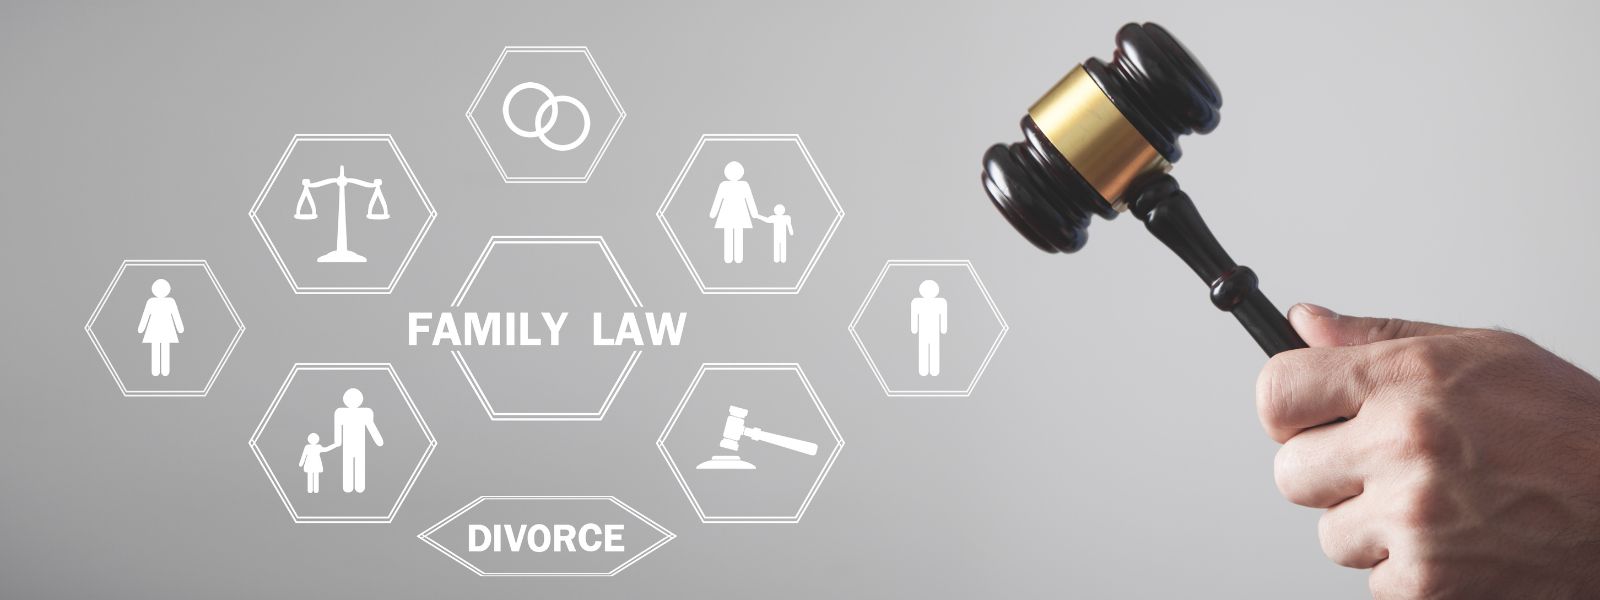 the words "family law" surrounded by images of different family law case types